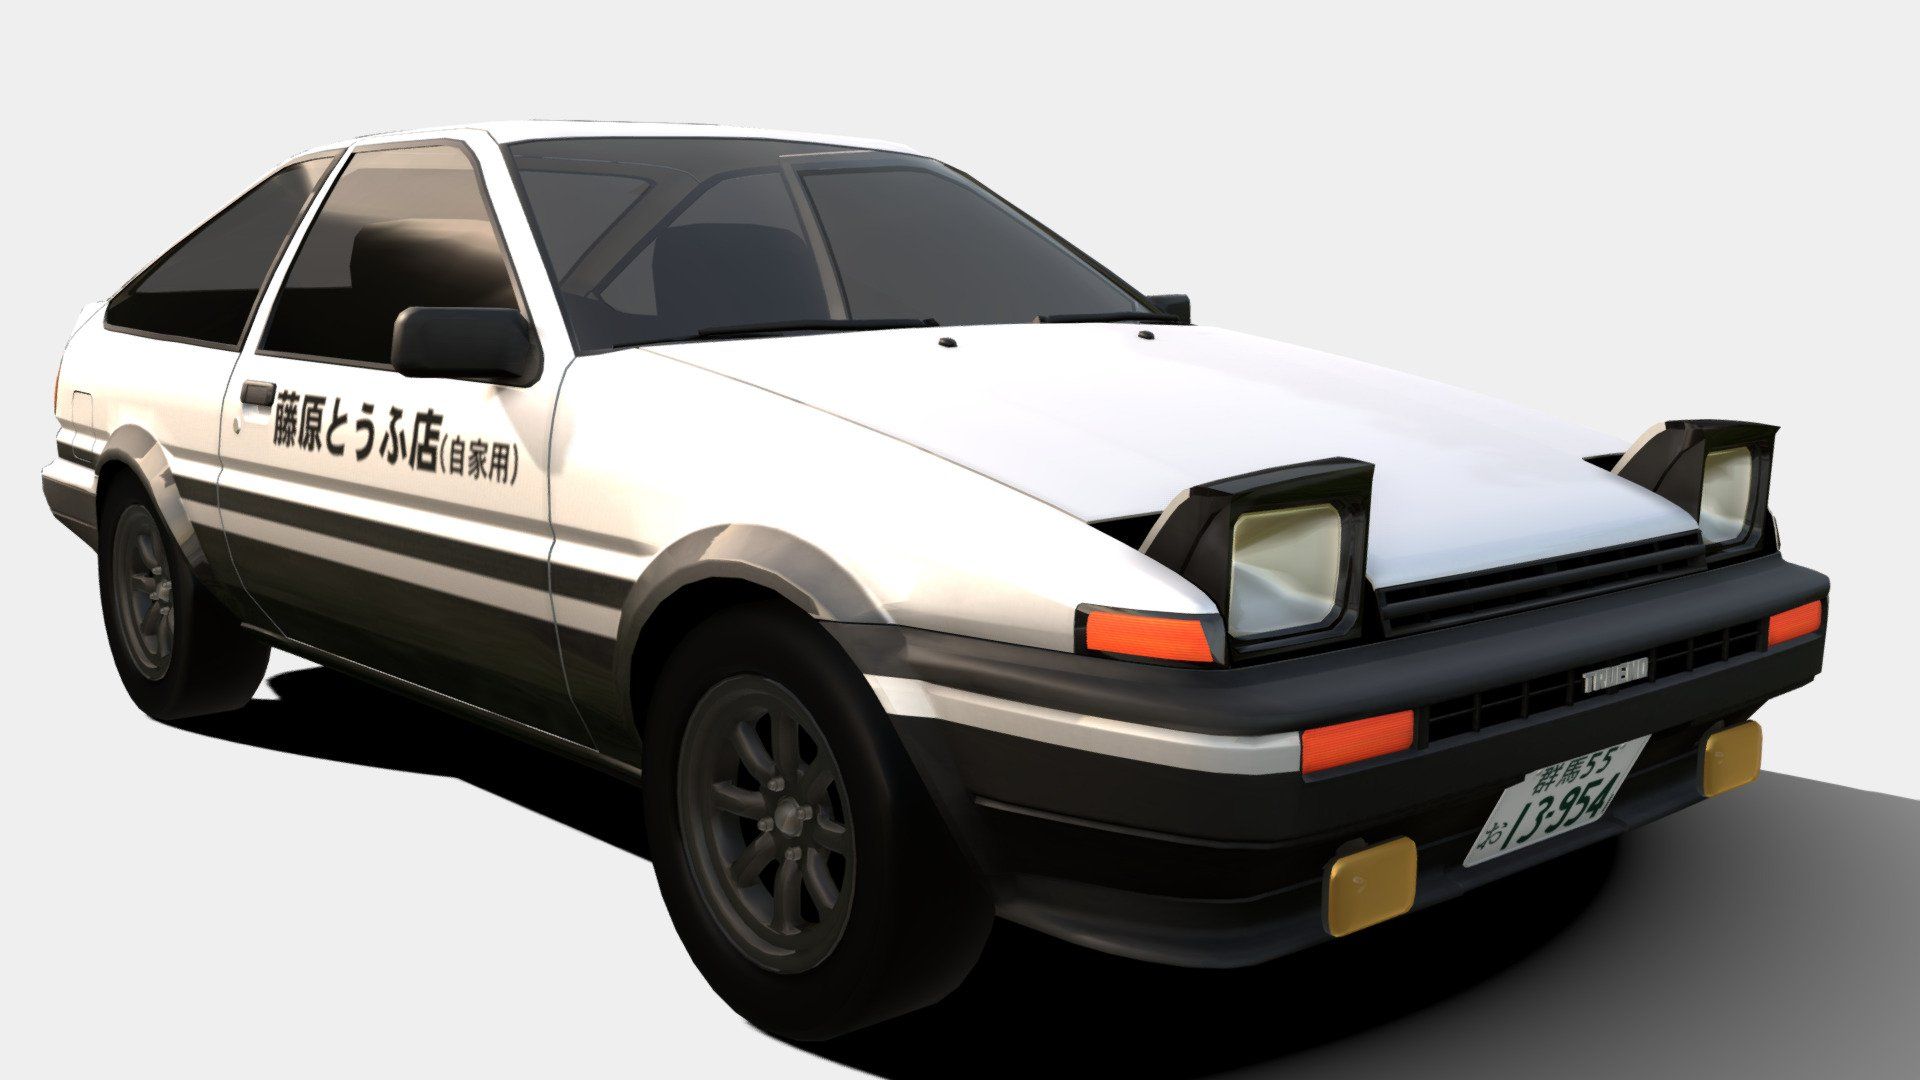 Toyota Sprinter Trueno (AE86) from the Initial D anime series, white with black roof and black wheels - Toyota AE86